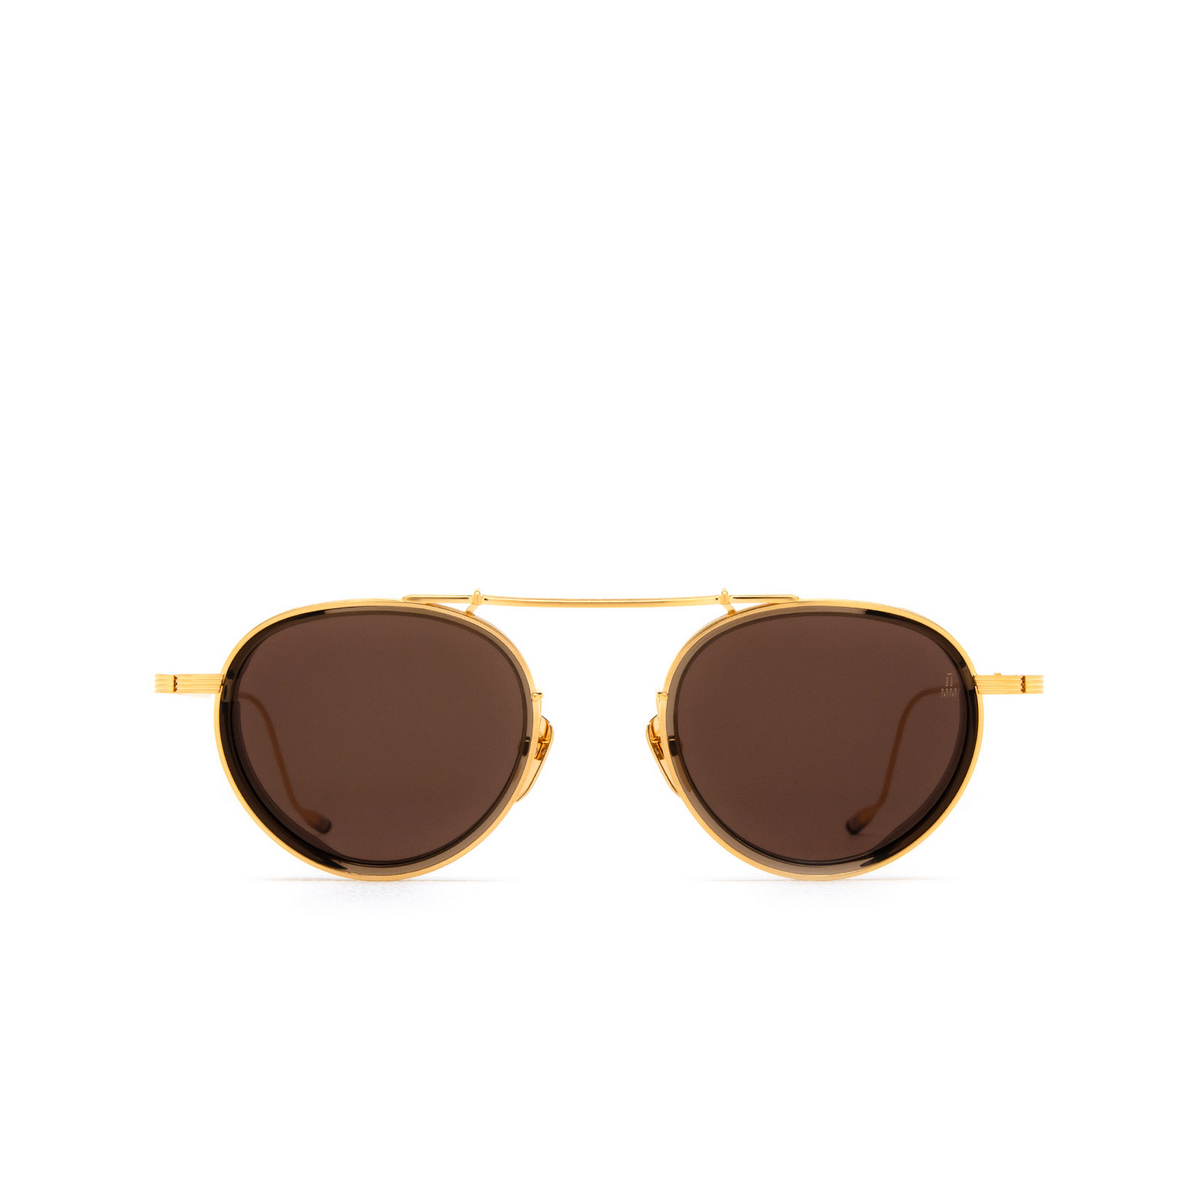 Jacques Marie Mage APOLLINAIRE 2 Sunglasses MAPLE - front view